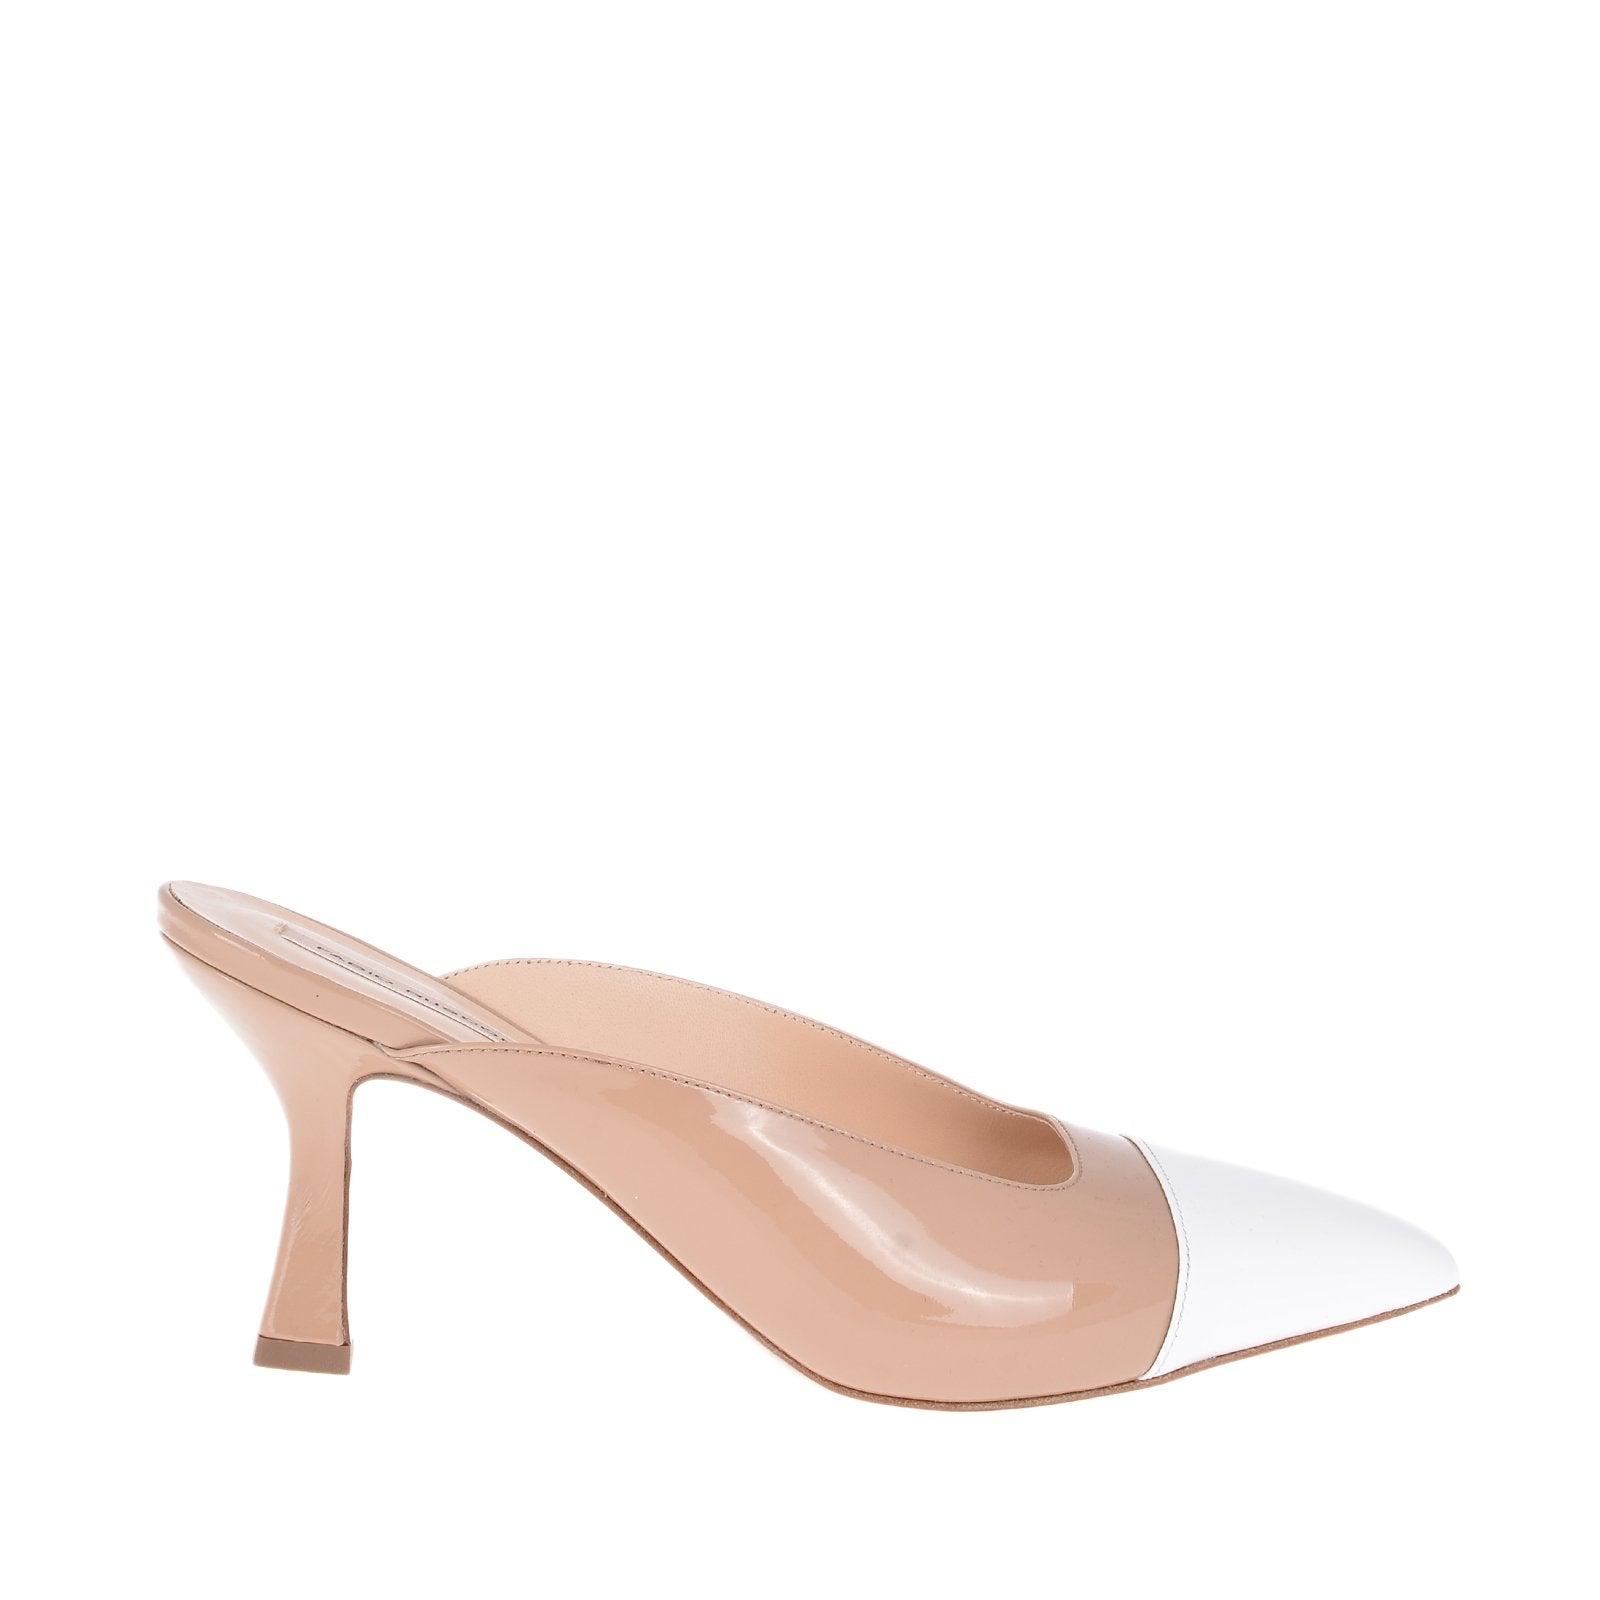 Ceppo Nude White Patent Mules Heels PATENT NUDE 2570 - 1